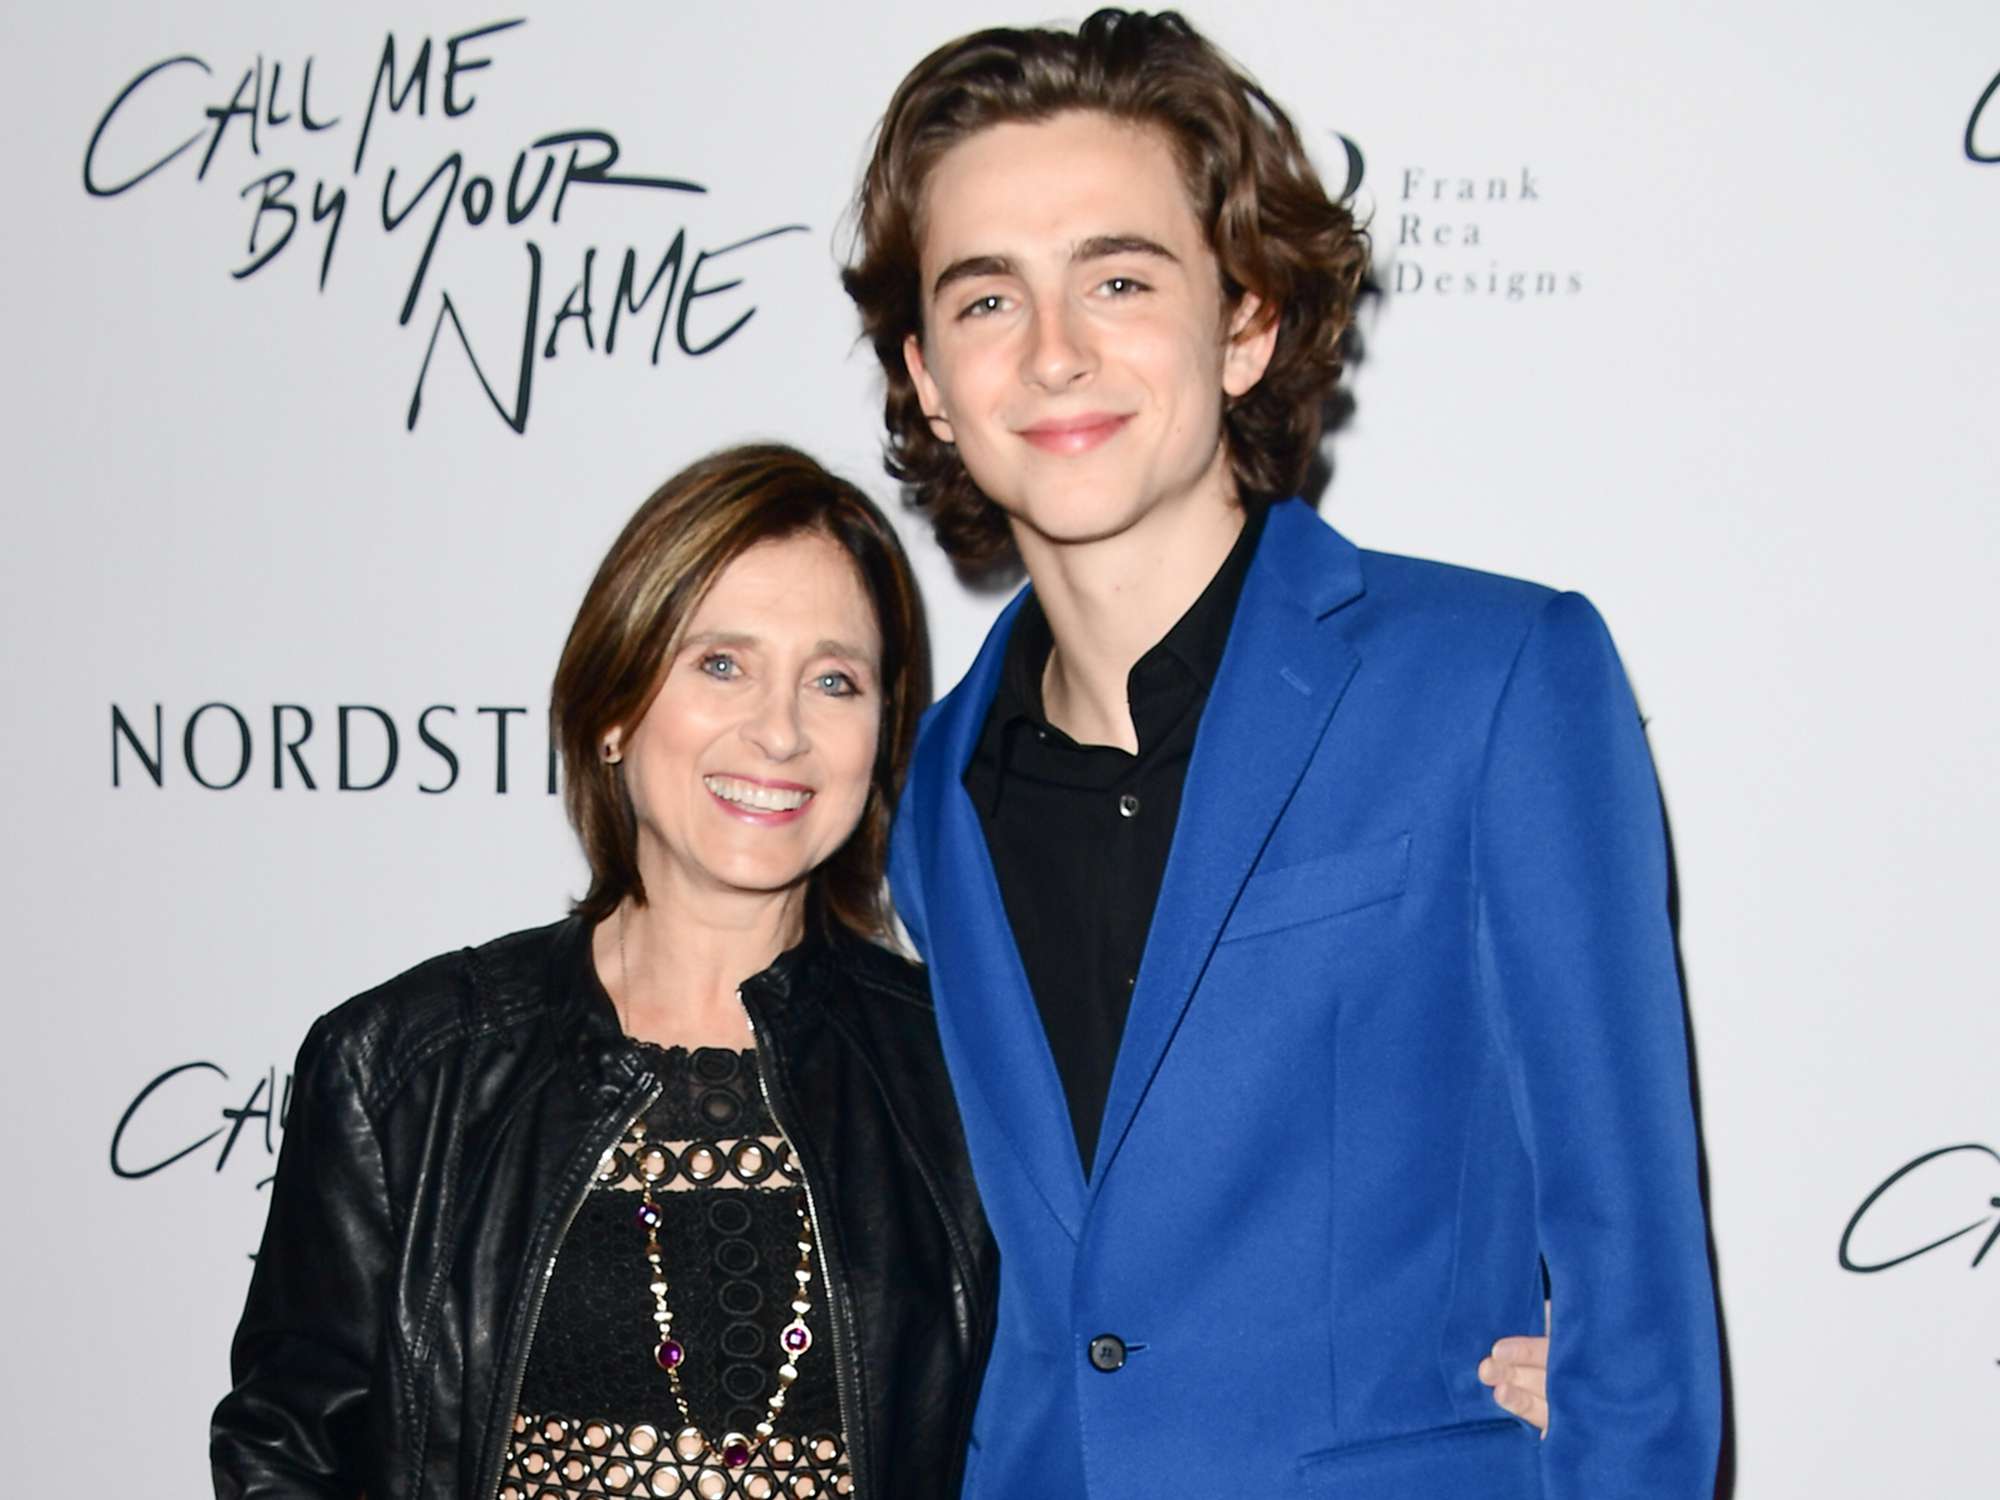 Nicole Flender and Timothee Chalamet arrive at Nordstrom Supper Suite "Call Me By Your Name" official premiere after party on September 7, 2017 in Toronto, Canada.